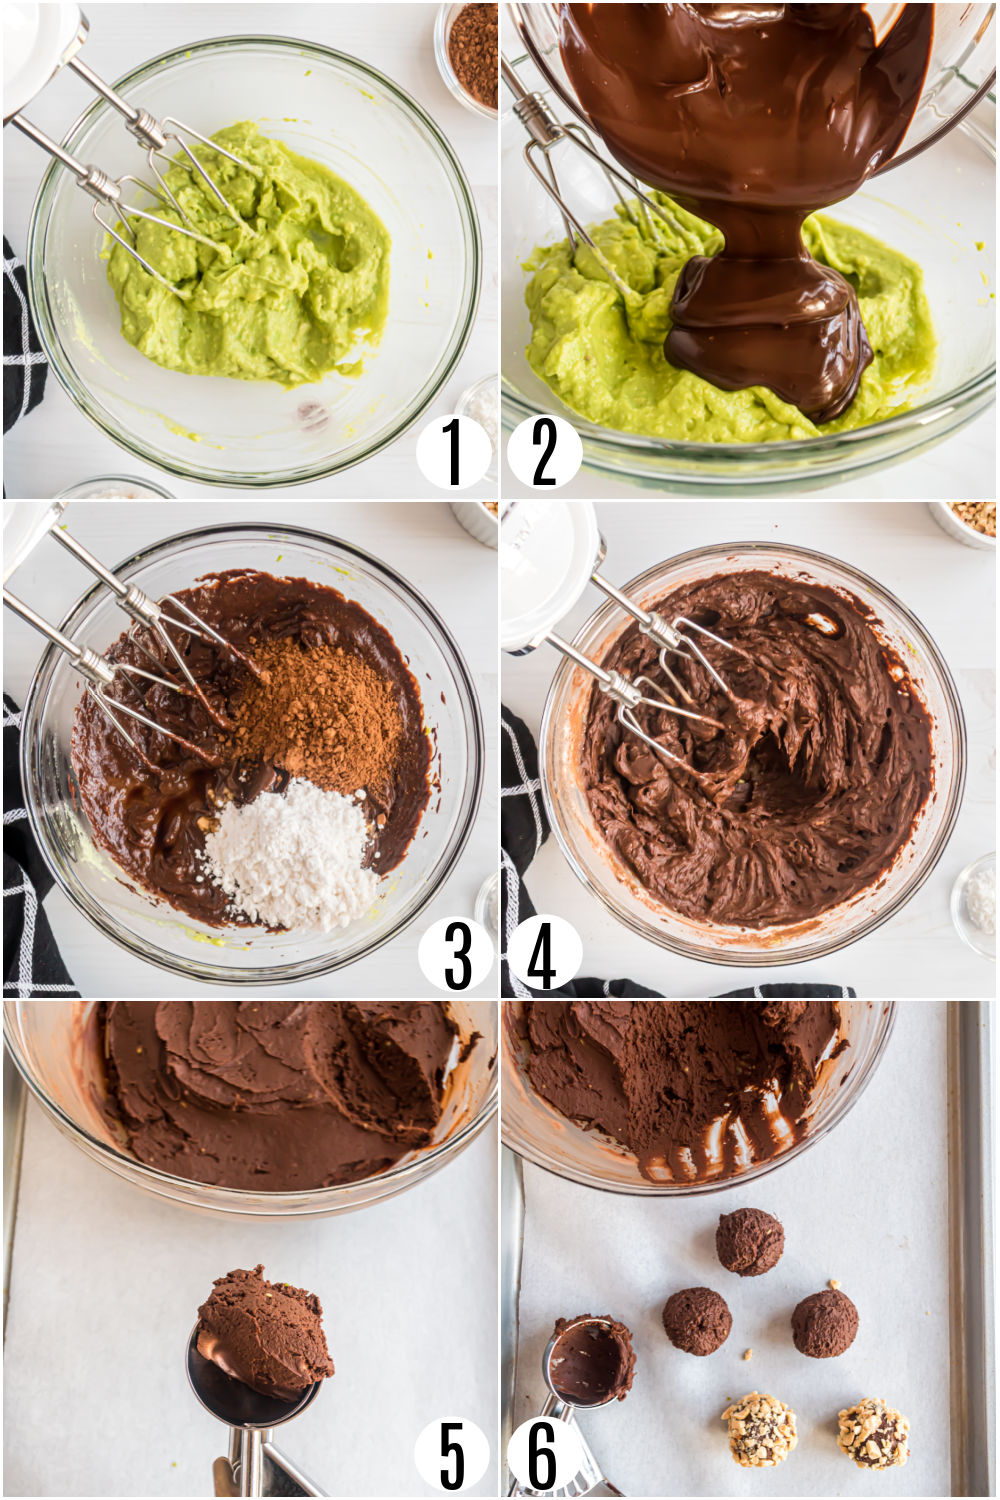 Step by step photos showing how to make avocado truffles.